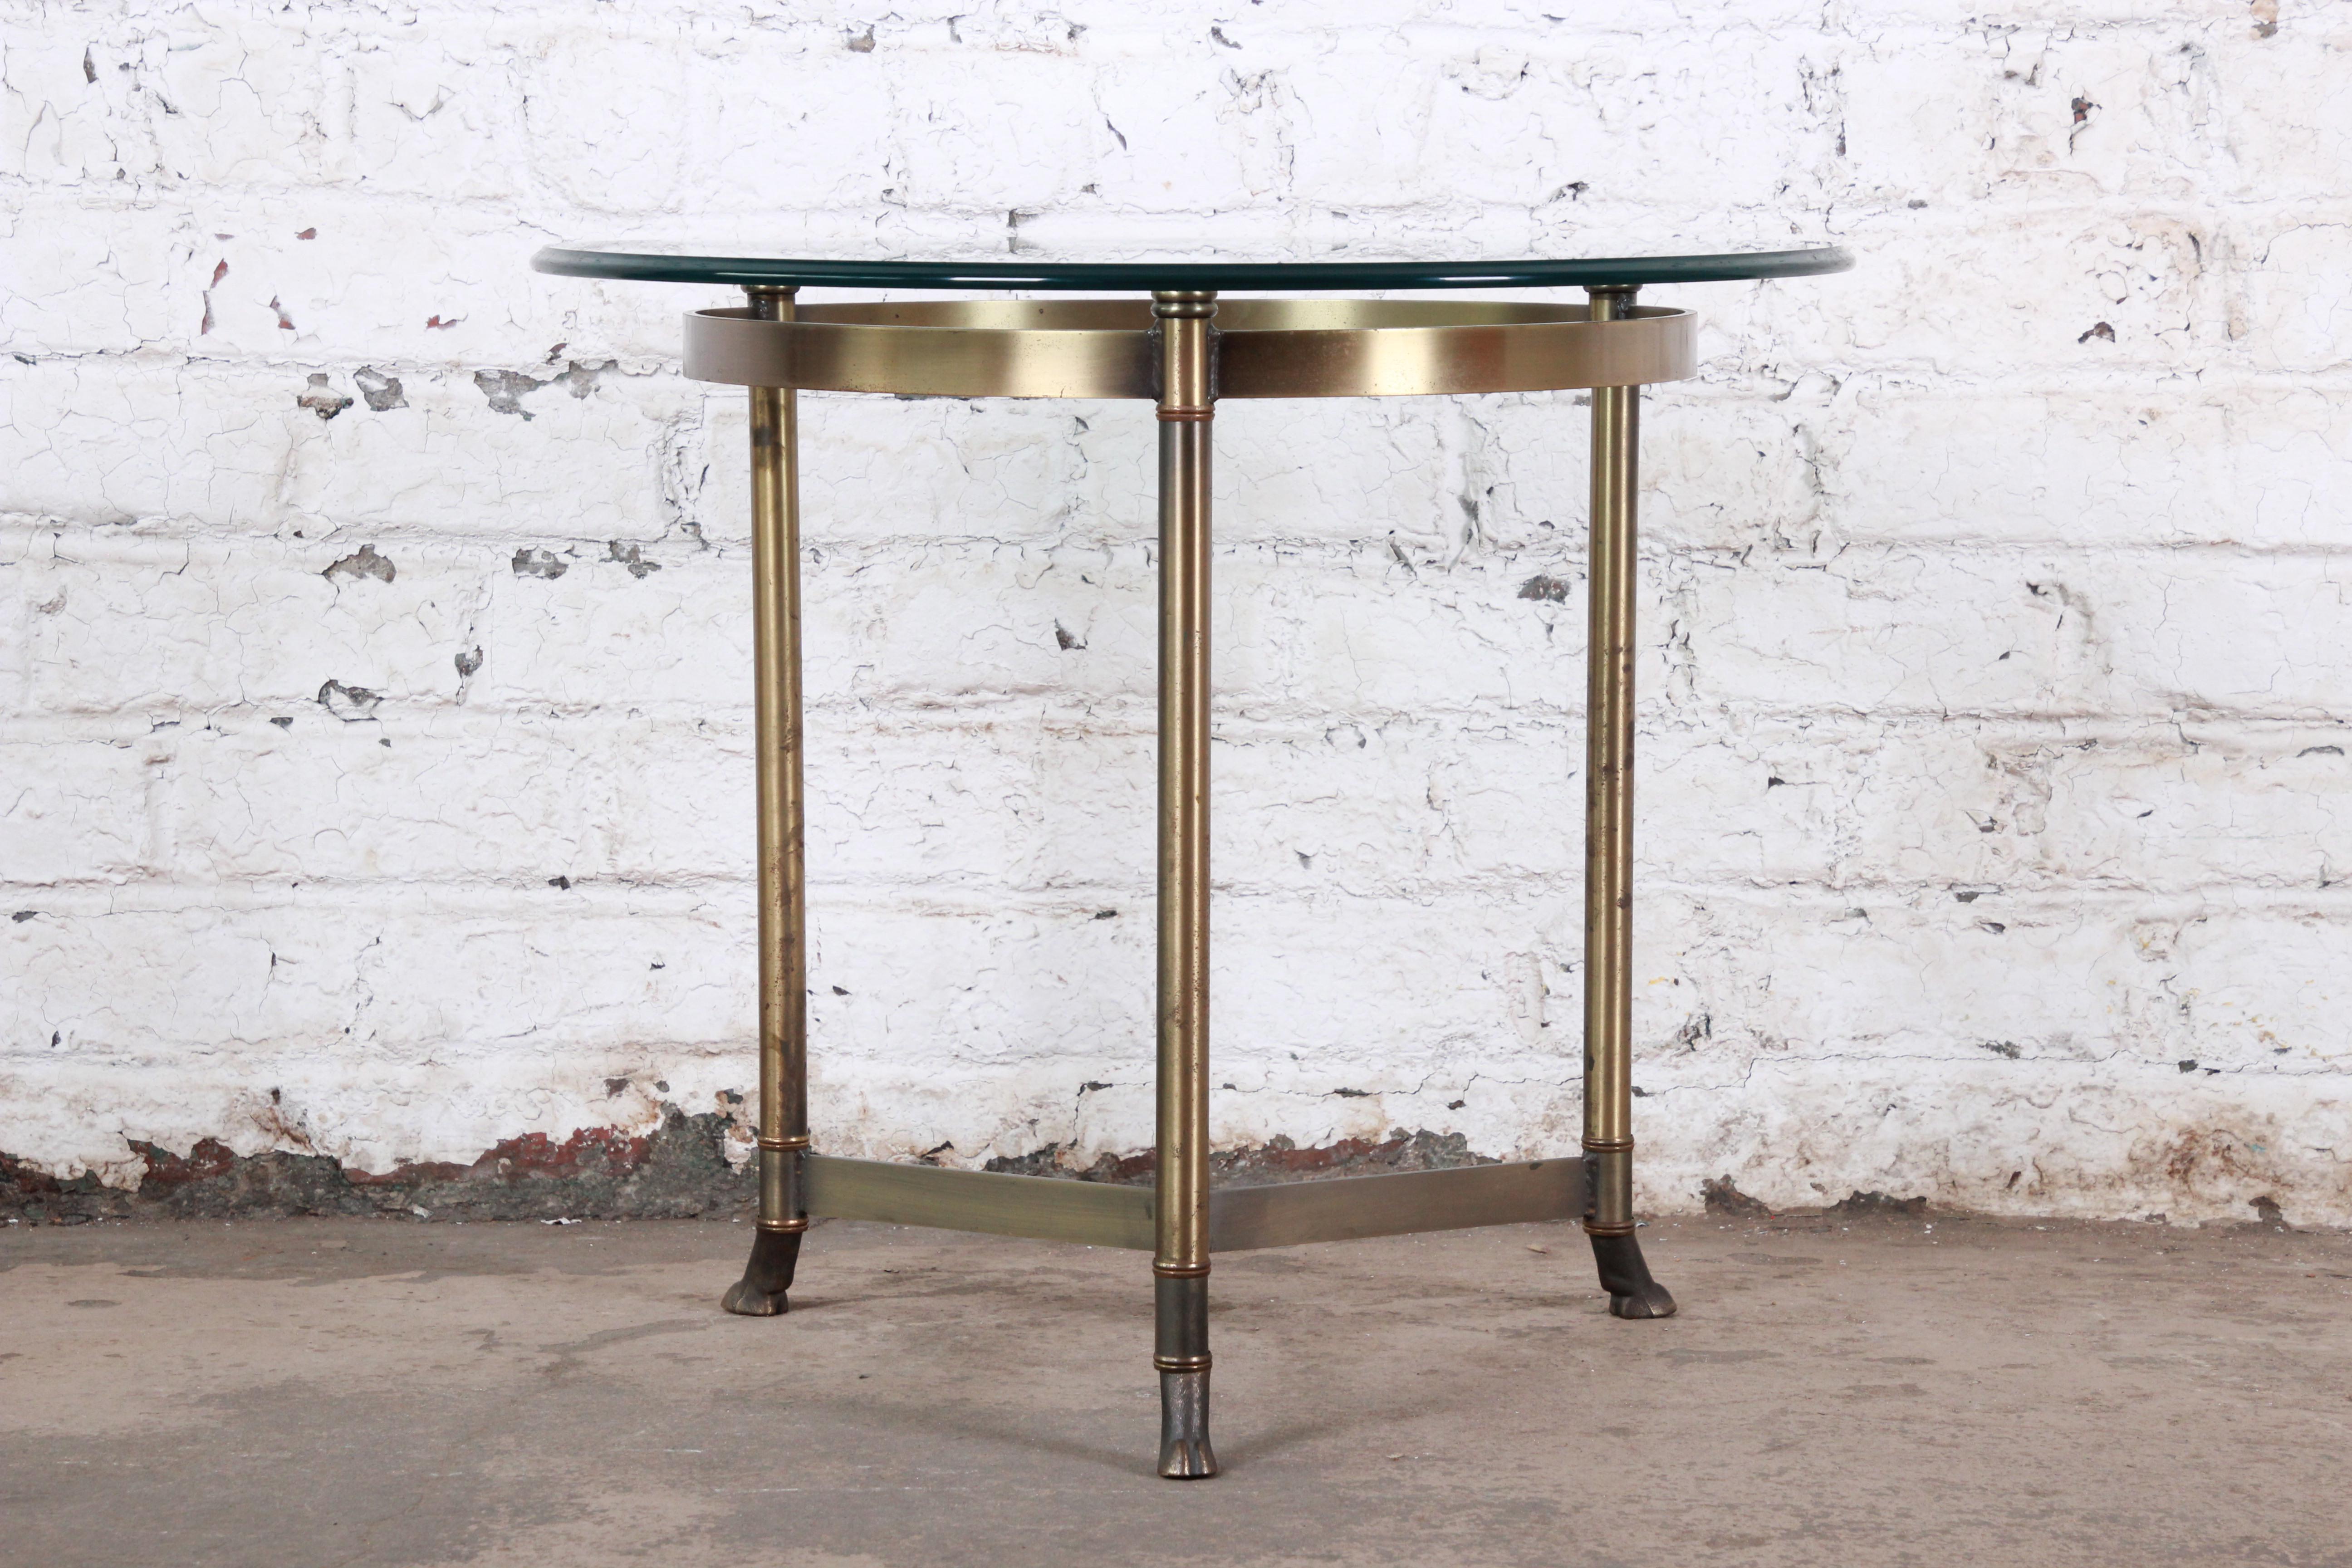 A gorgeous midcentury Hollywood Regency brass and glass side table by Labarge. The table features a stylish three-legged brass base with stretchers and unique hooved feet. The table is in very good original vintage condition.

The table measures